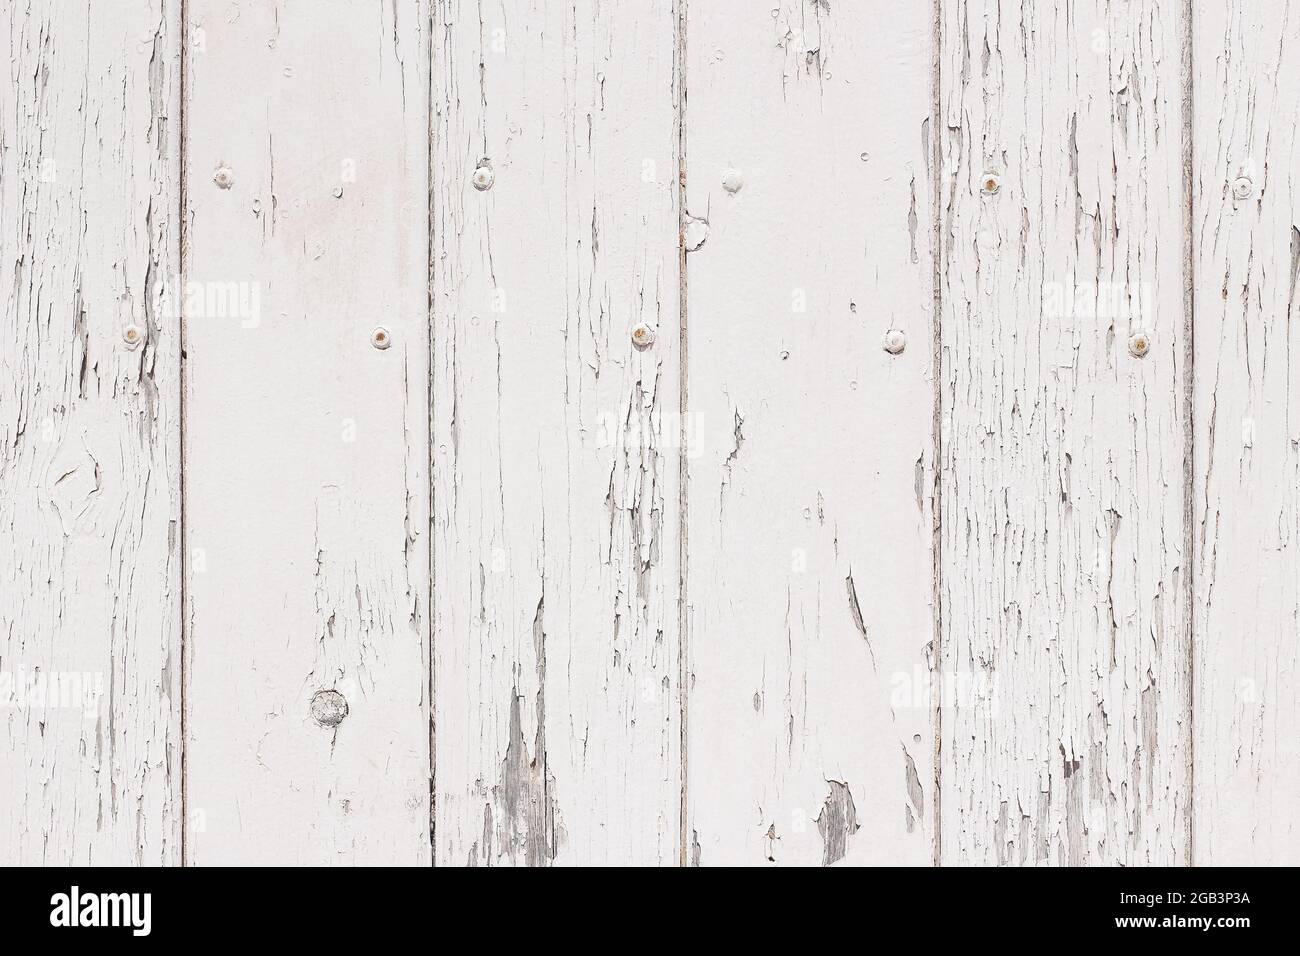 Closeup of old wooden vertical plank background. Aged white painted doors, fence. Weathered timber panels. Grunge textured backdrop. Rough decorative Stock Photo